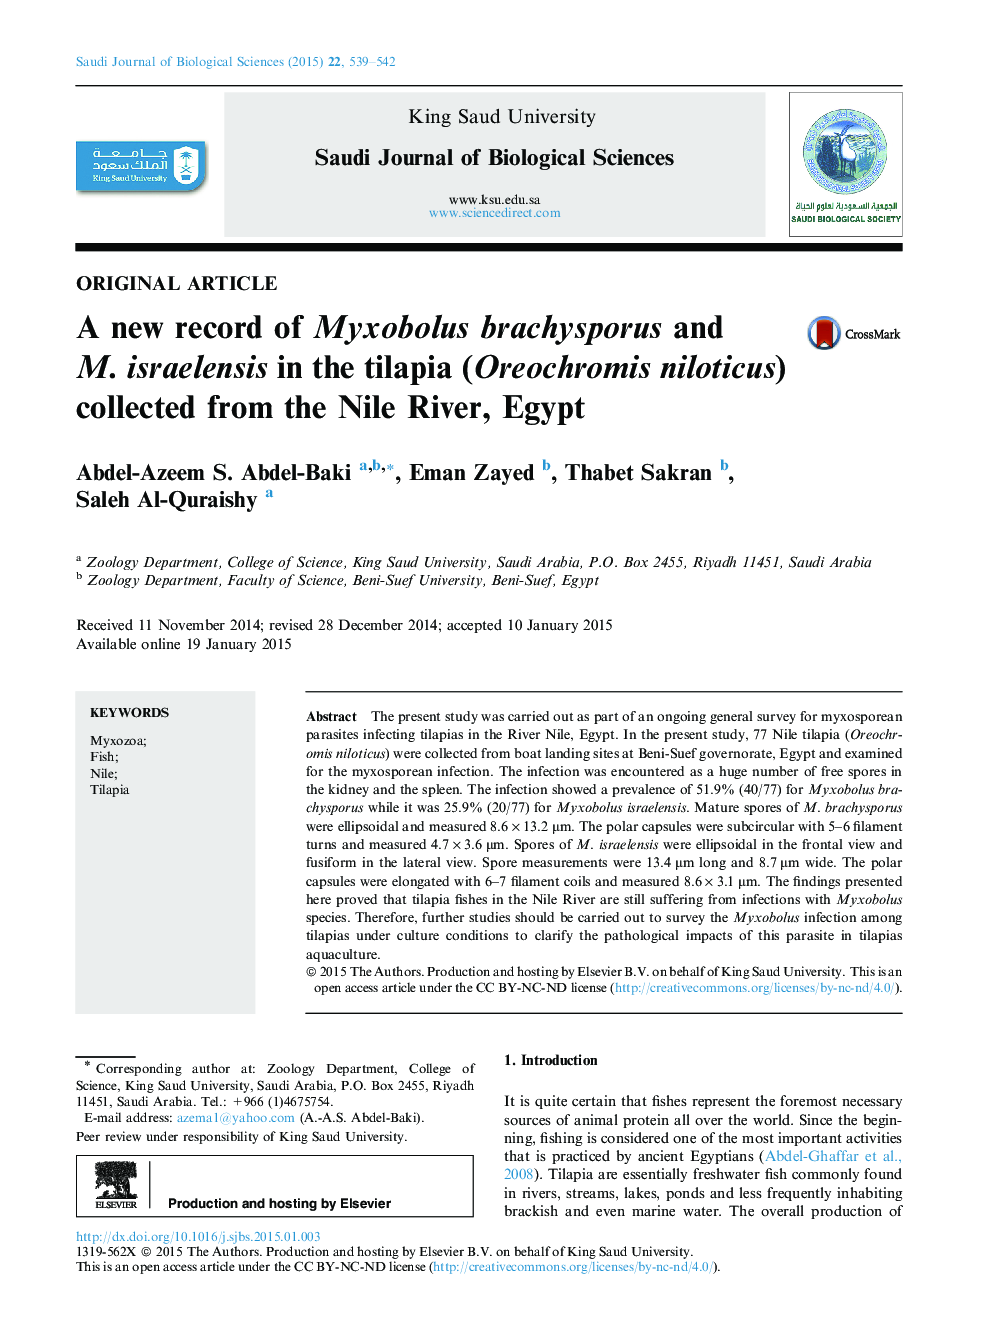 A new record of Myxobolus brachysporus and M. israelensis in the tilapia (Oreochromis niloticus) collected from the Nile River, Egypt 